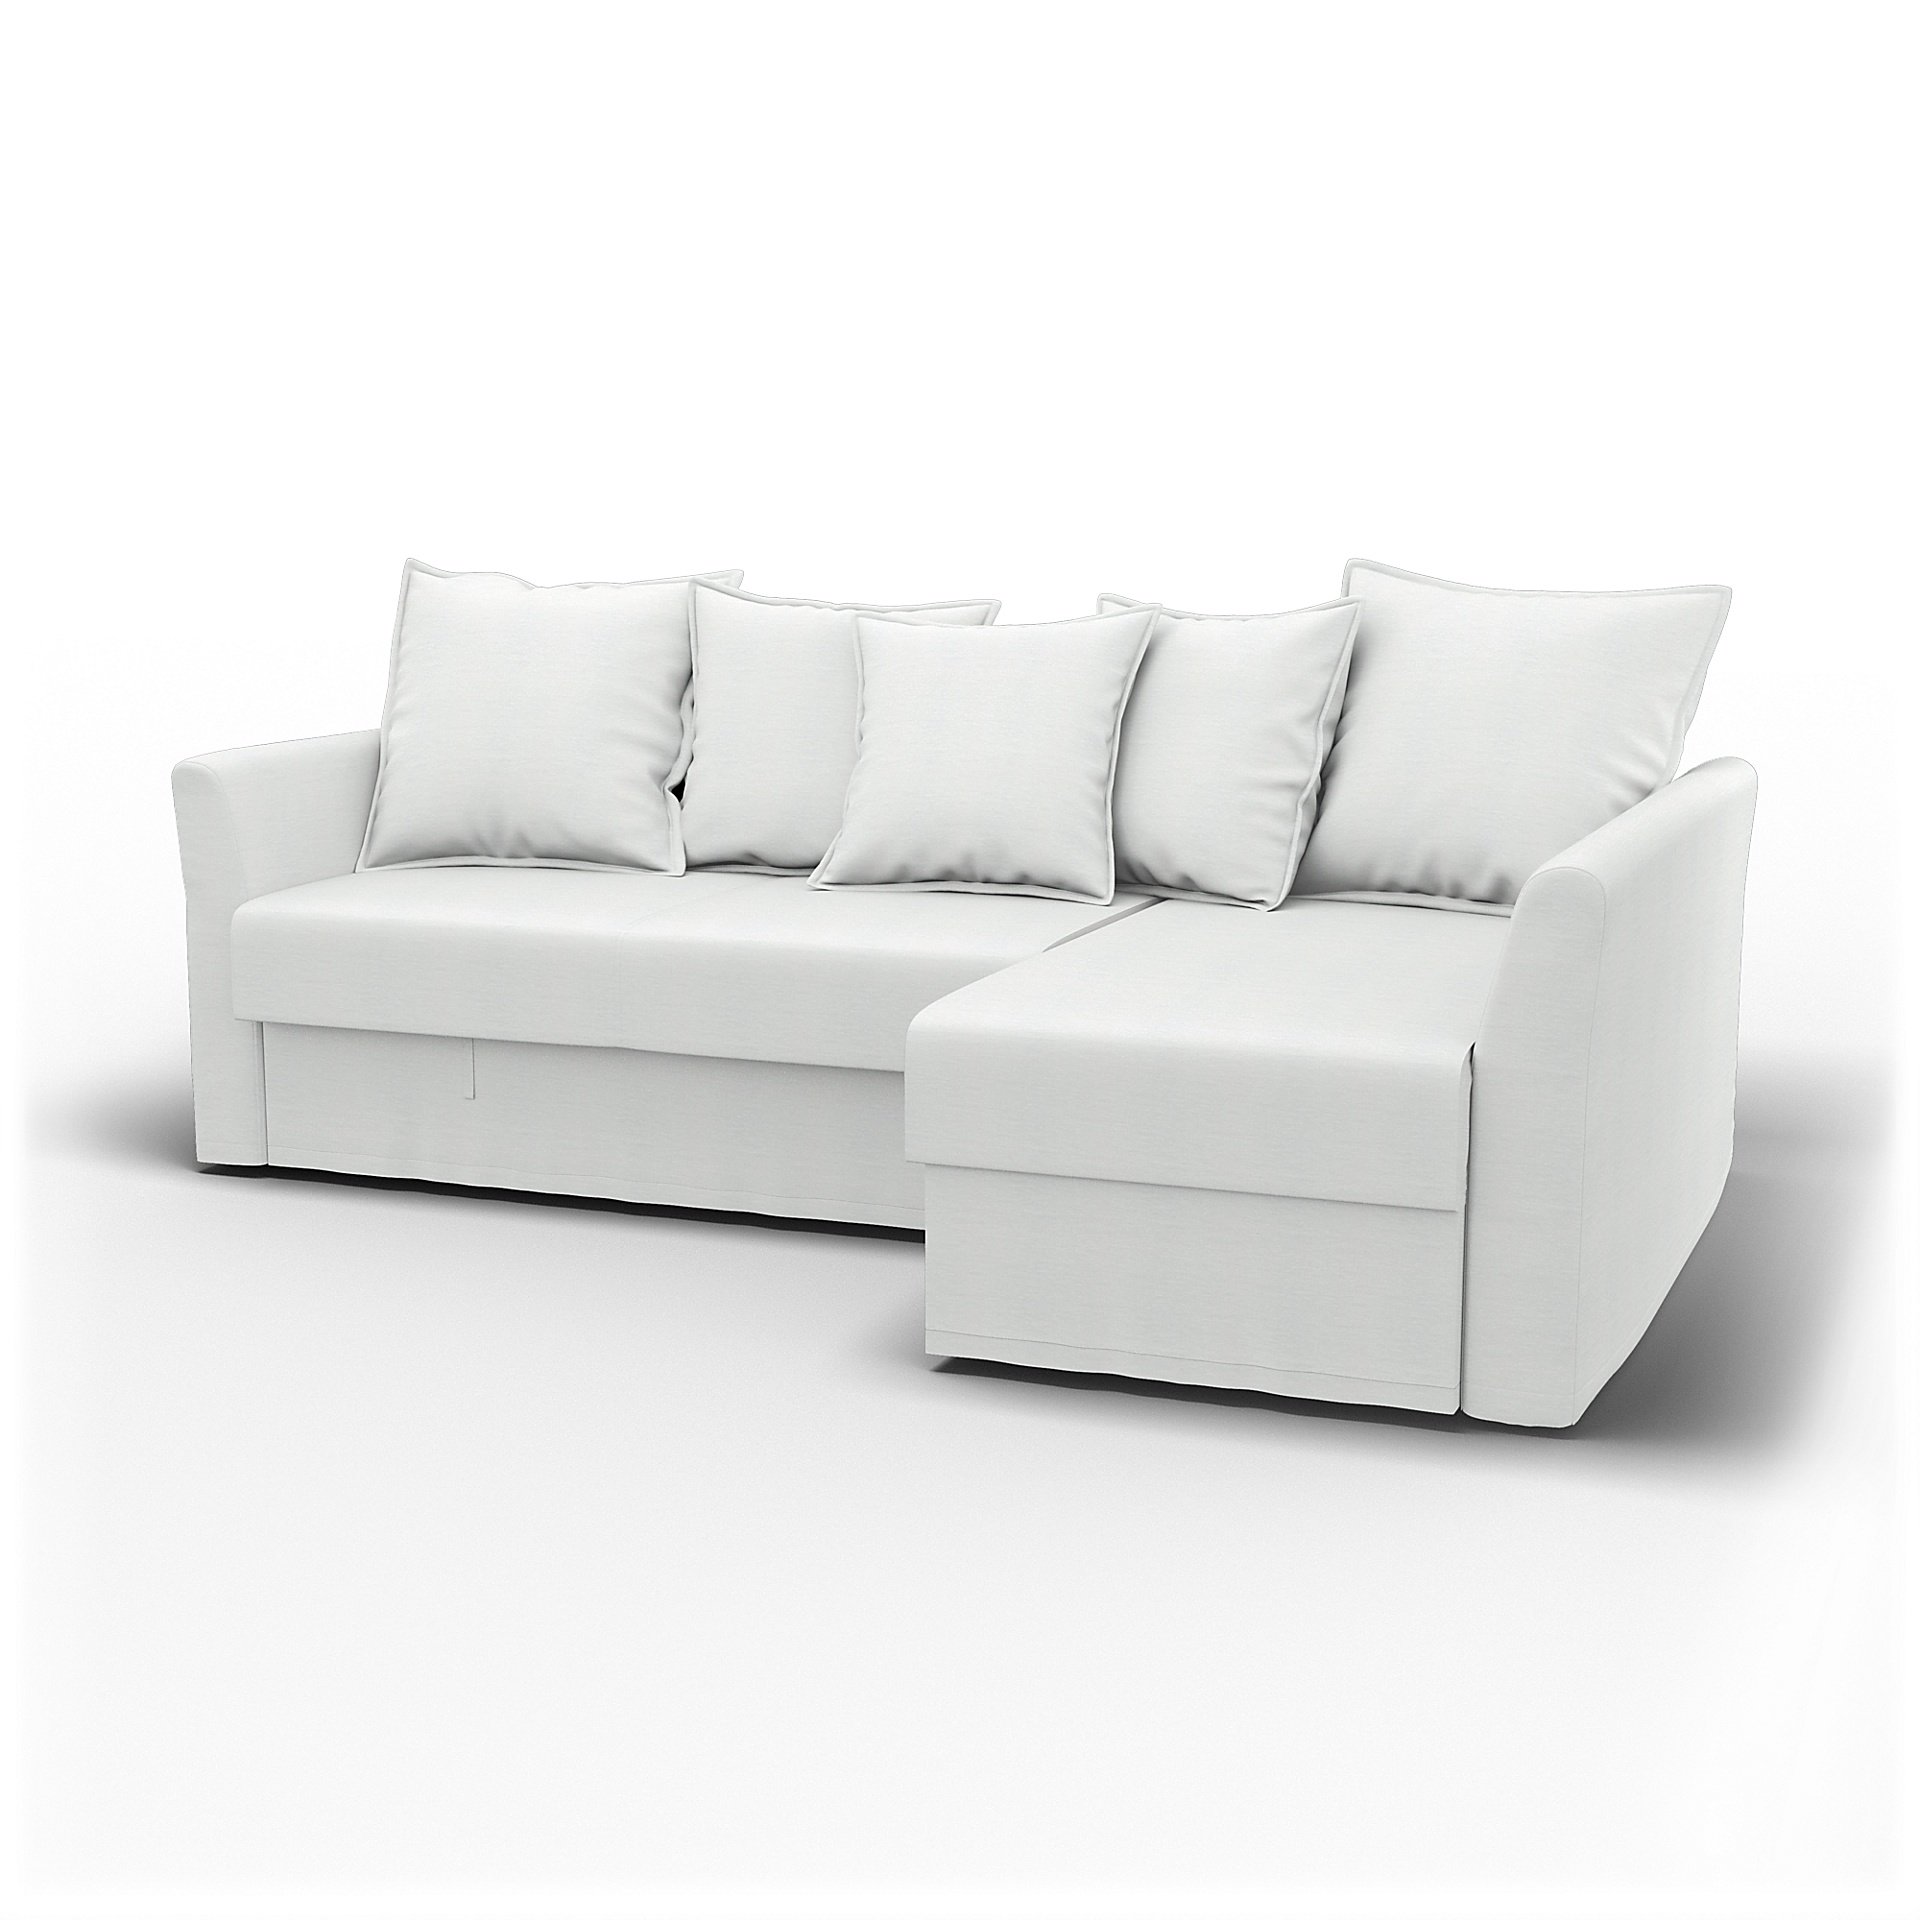 IKEA - Holmsund Sofabed with Chaiselongue, White, Linen - Bemz